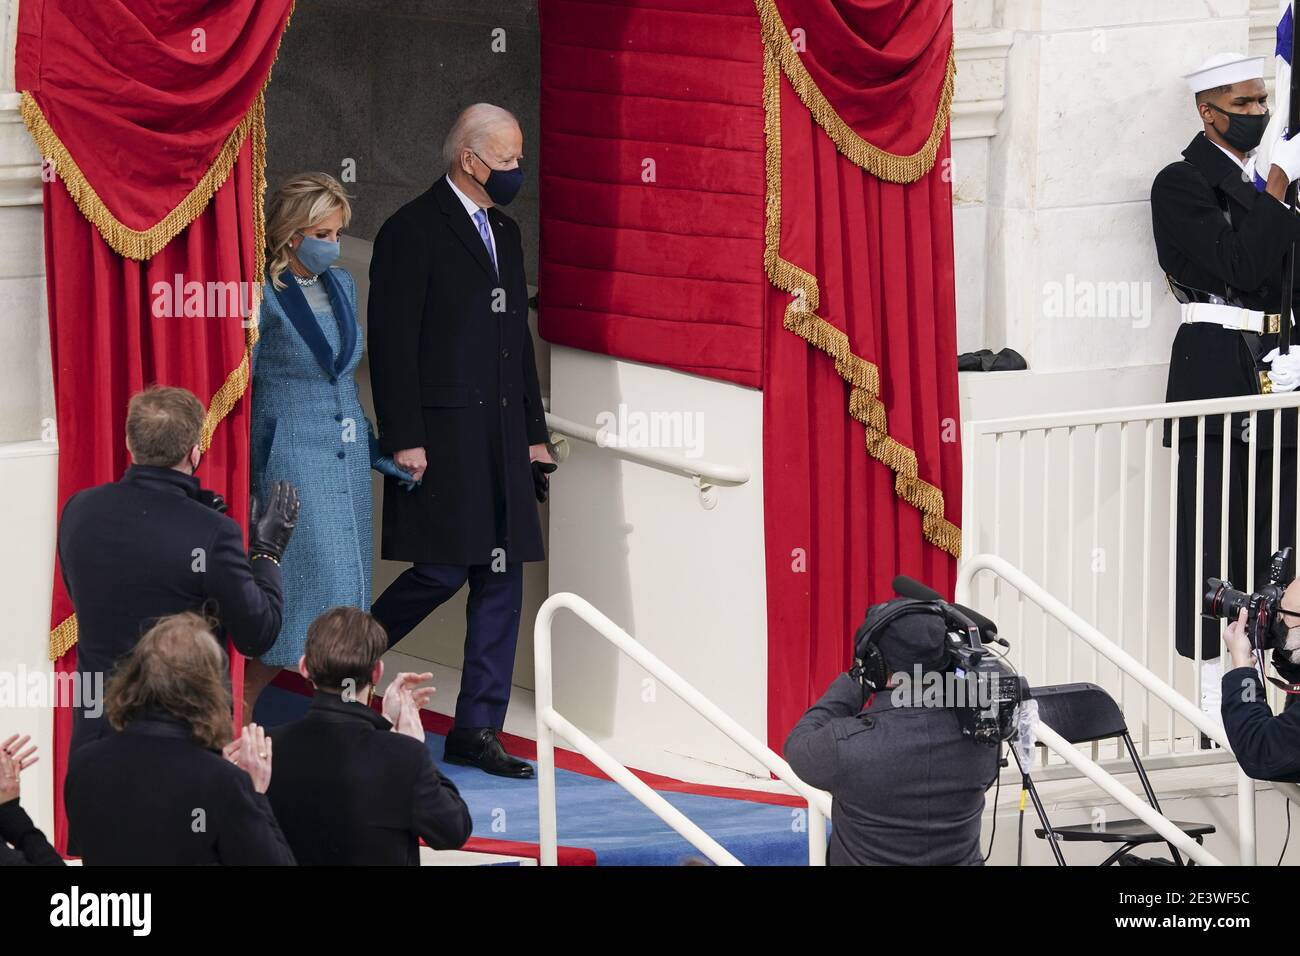 U.S. President-elect Joe Biden, right, and Dr. Jill Biden arrive to the 59th presidential inauguration in Washington, DC, U.S., on Wednesday, Jan. 20, 2021. Biden will propose a broad immigration overhaul on his first day as president, including a shortened pathway to U.S. citizenship for undocumented migrants - a complete reversal from Donald Trump's immigration restrictions and crackdowns, but one that faces major roadblocks in Congress. Photographer: Kevin Dietsch/UPI/MediaPunch Stock Photo